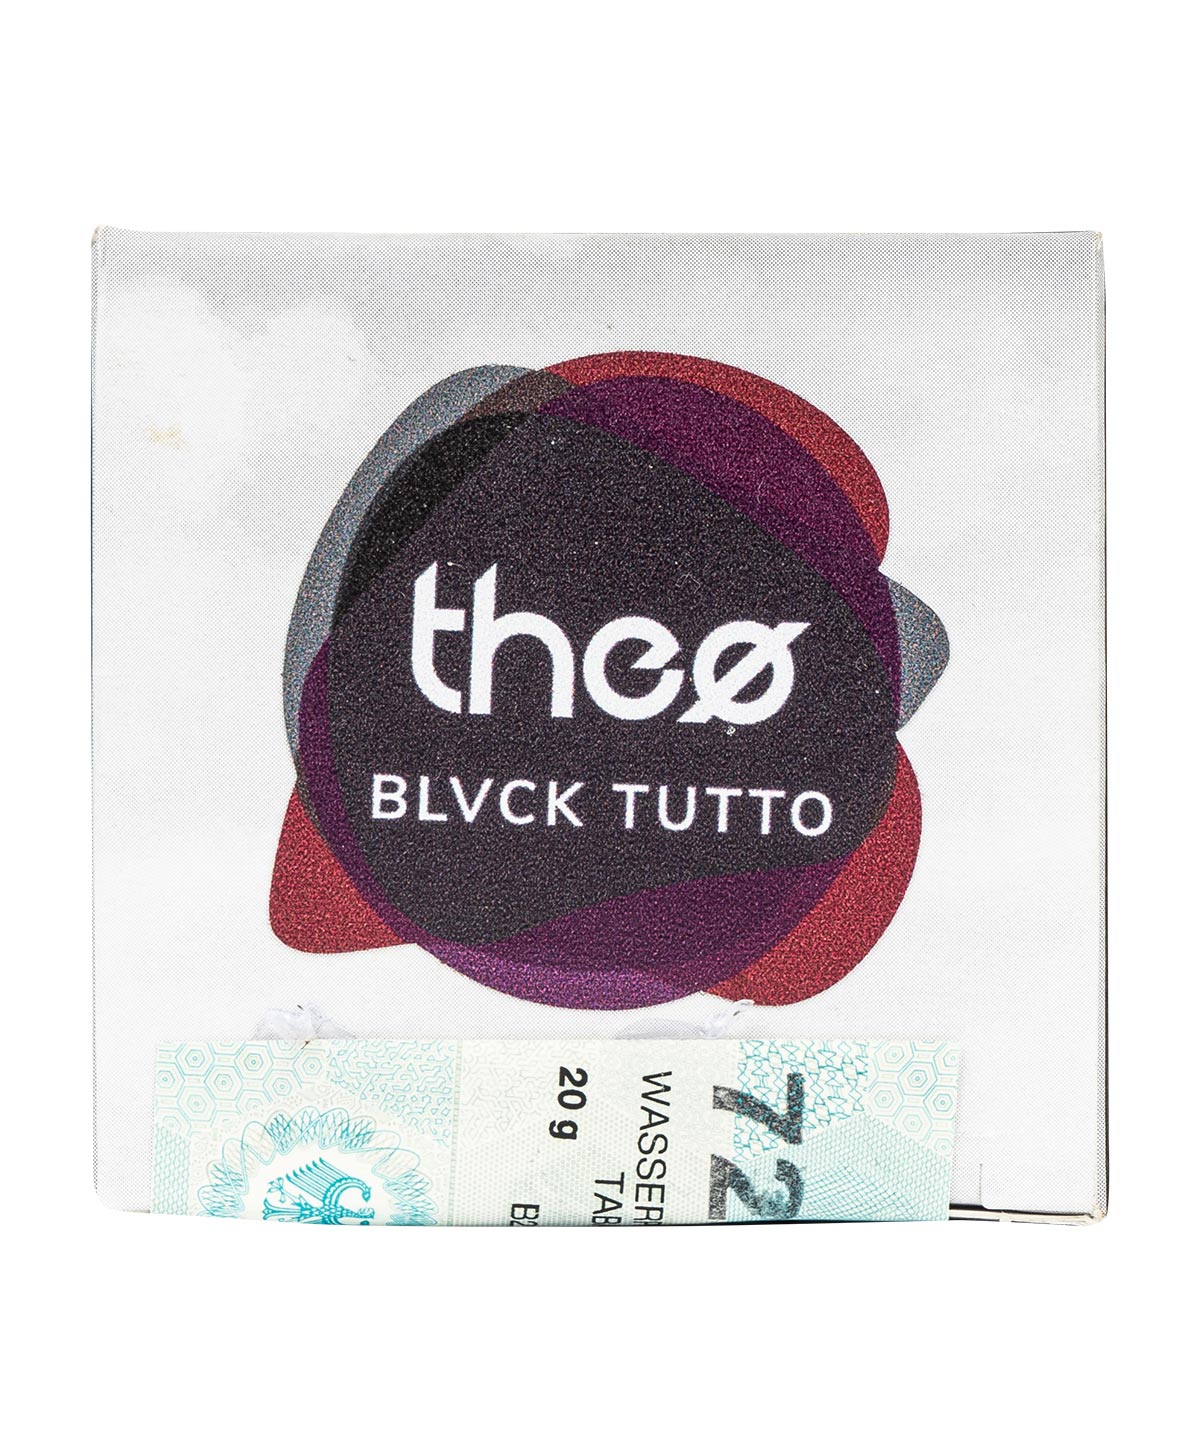 Theo Blvck Tutto 20g